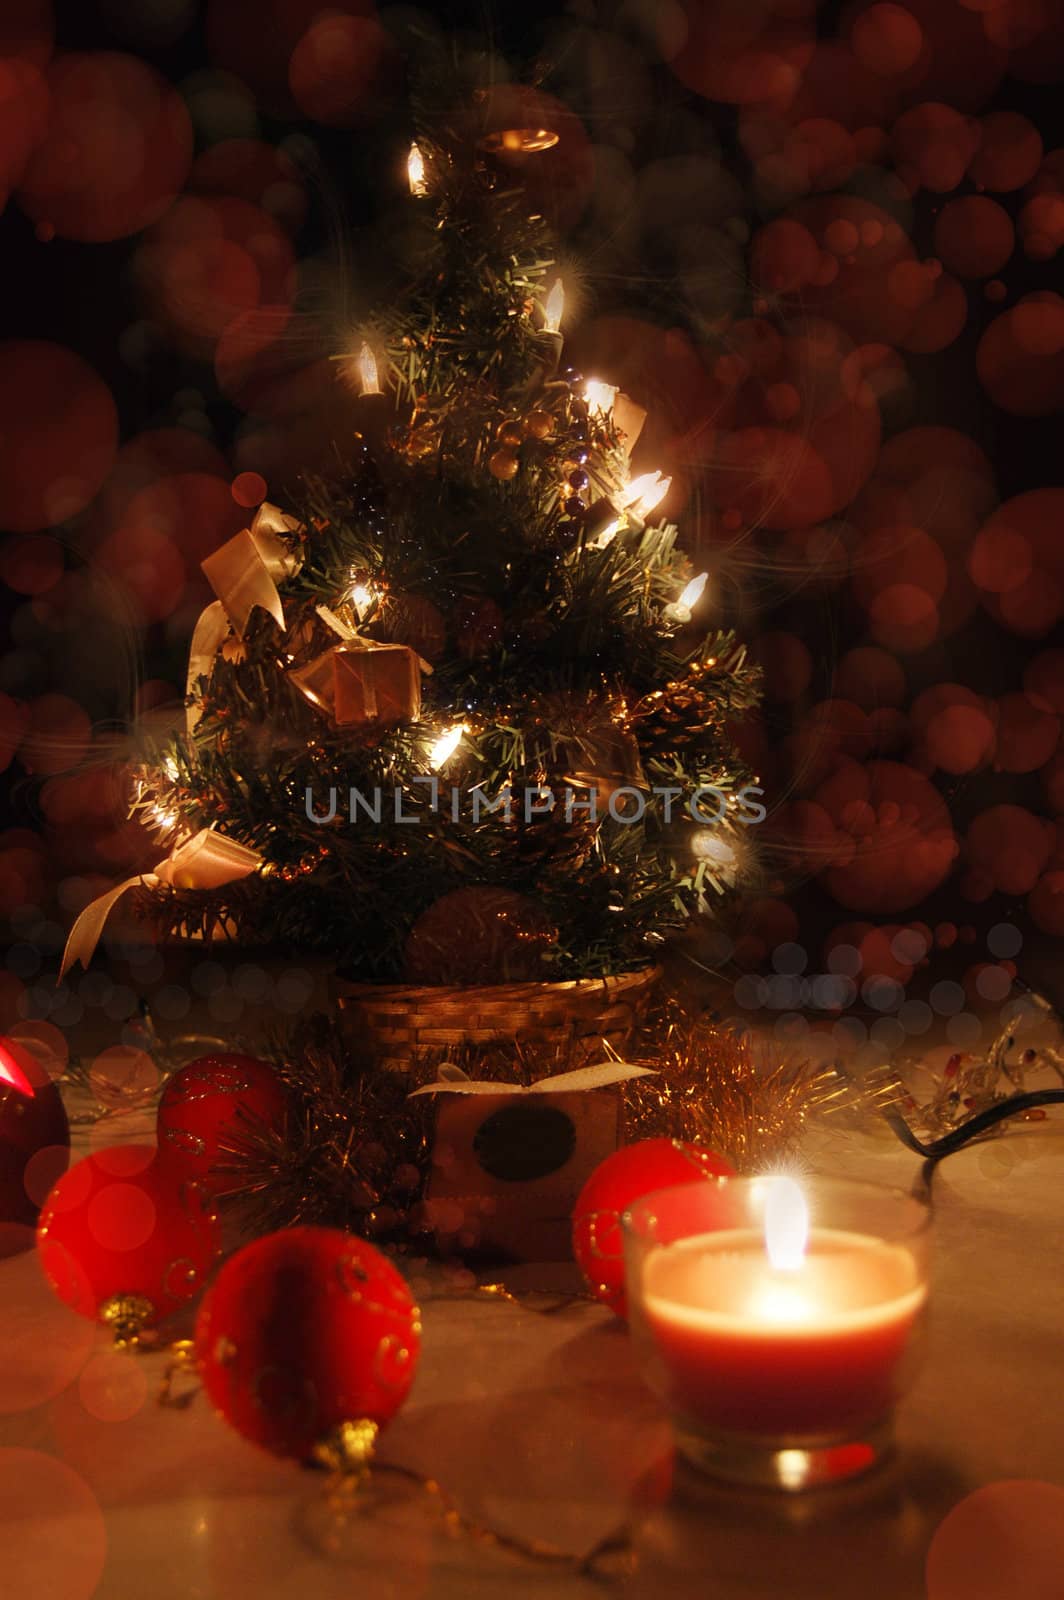 Christmas tree with lights and candles over black, tree in focus